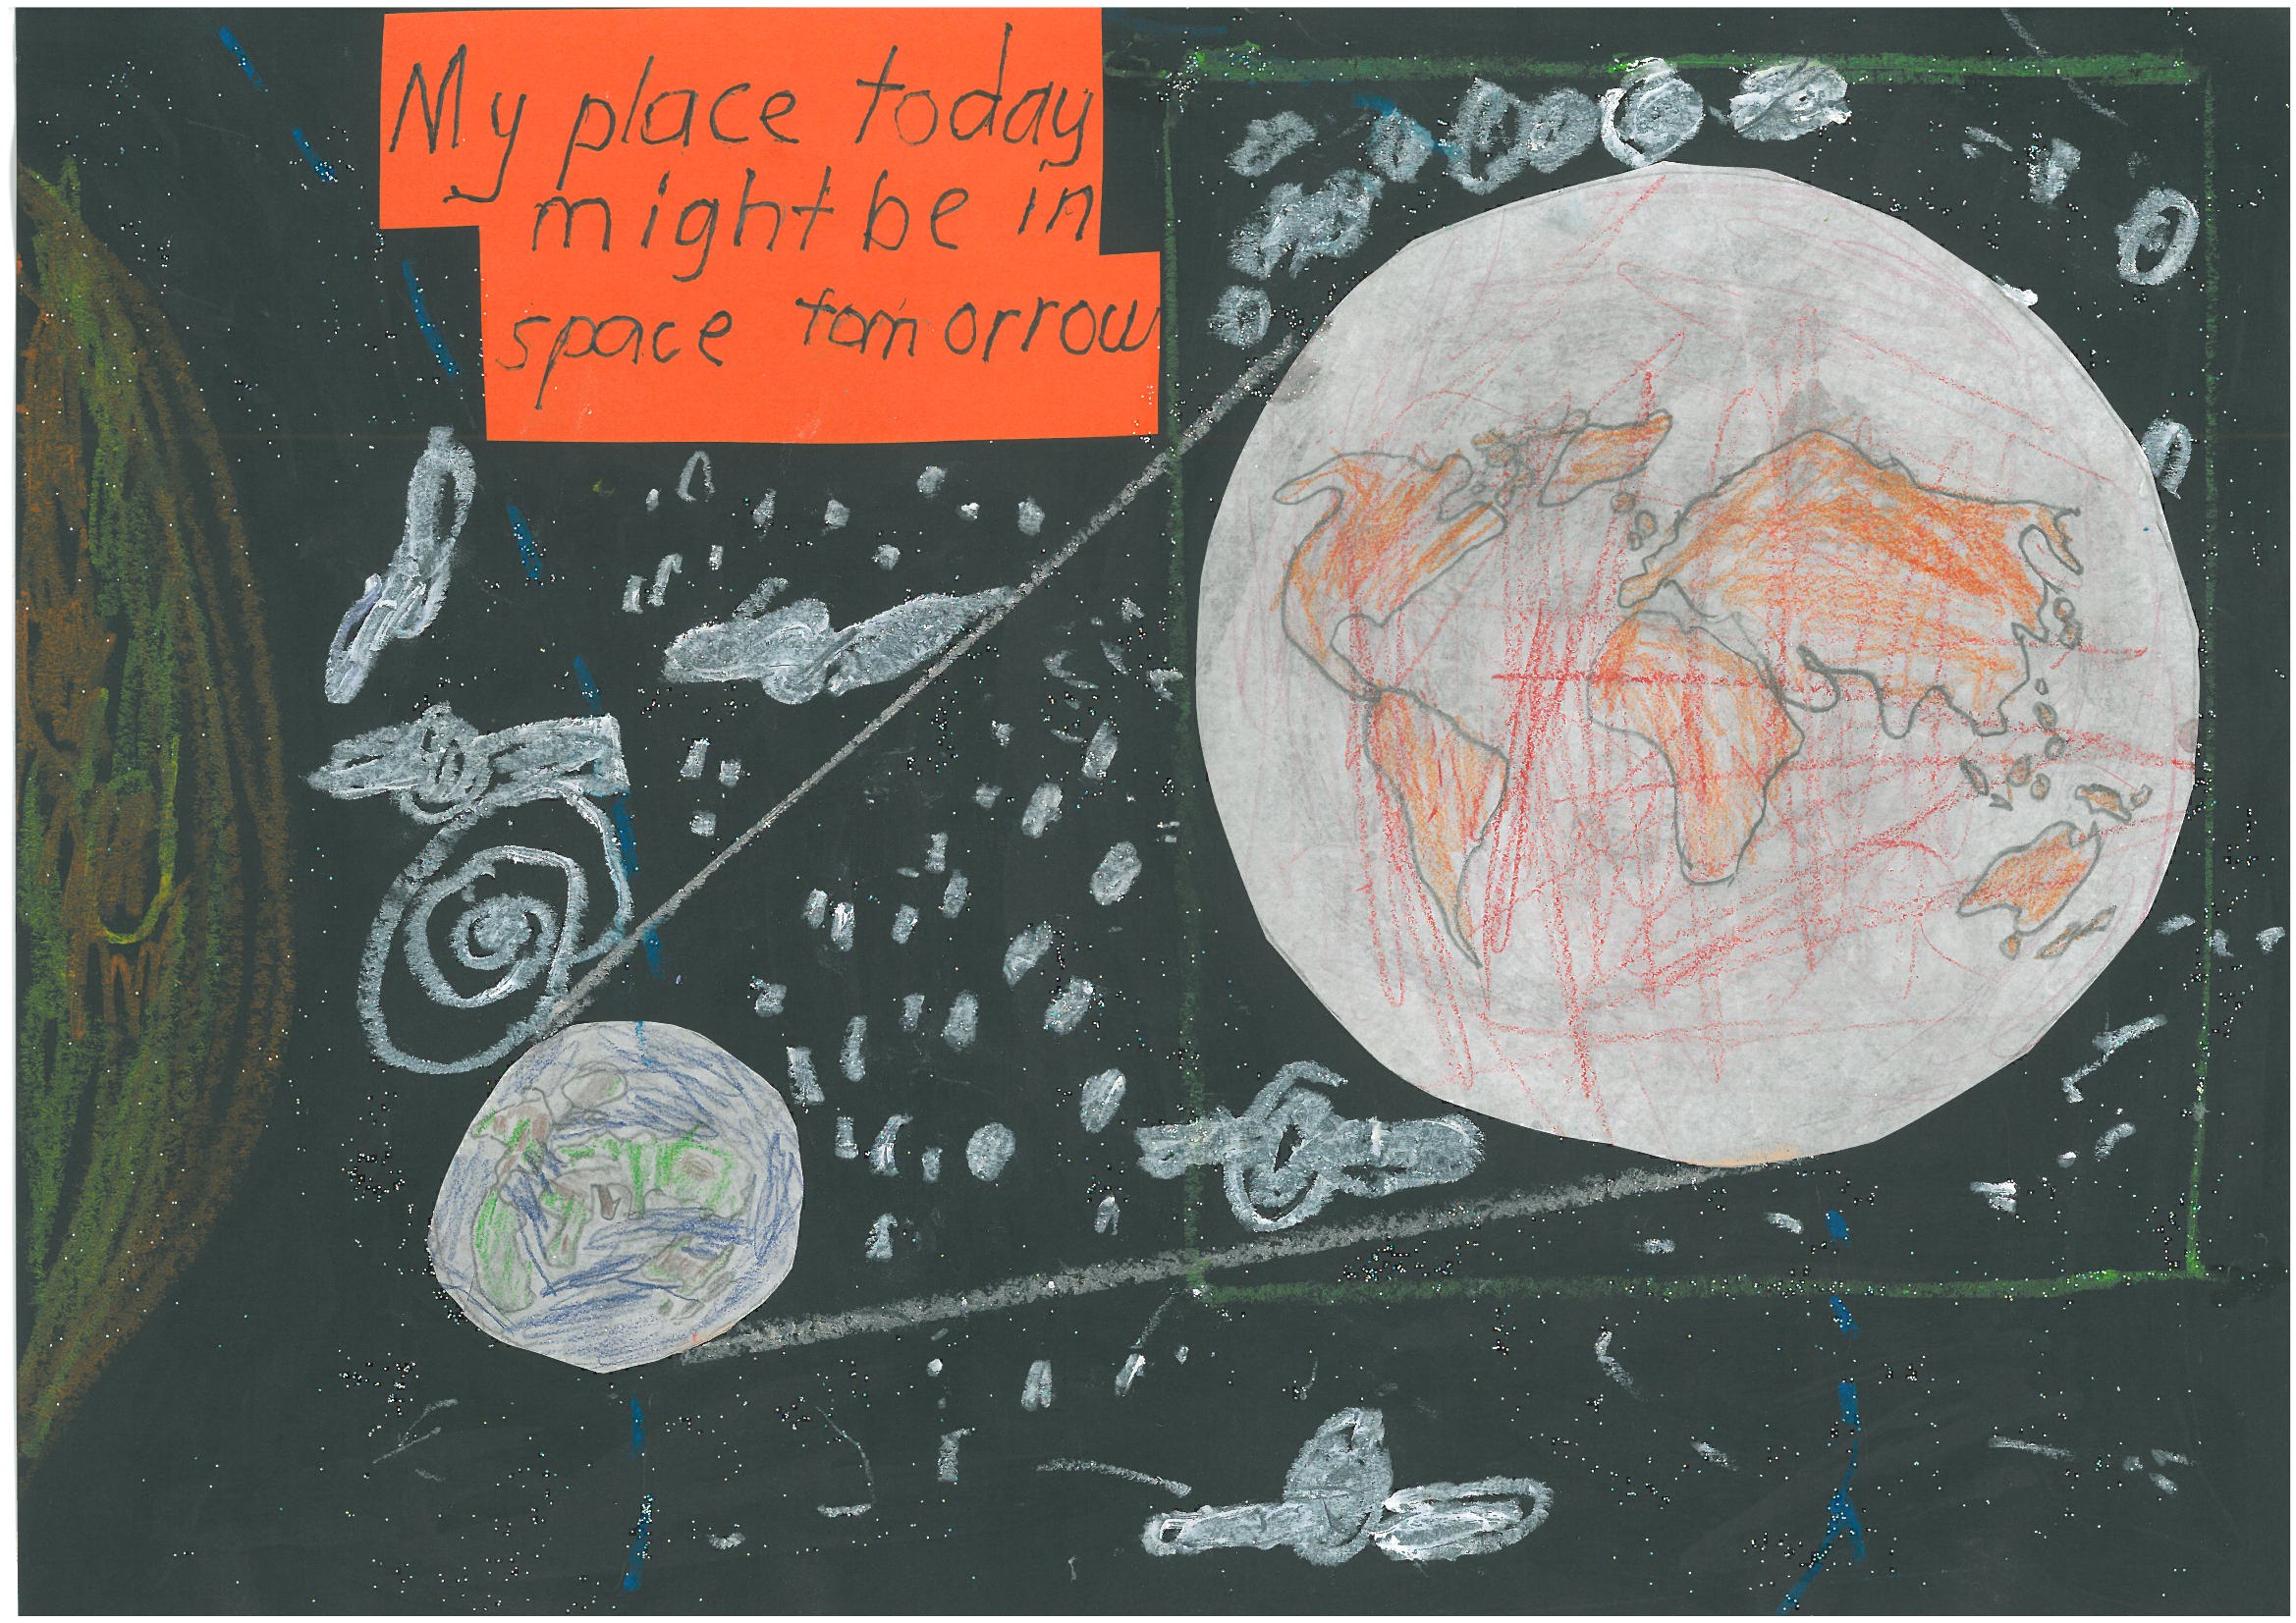 034 - My place today might be in space tomorrow
Otto Pattemore - Age 6